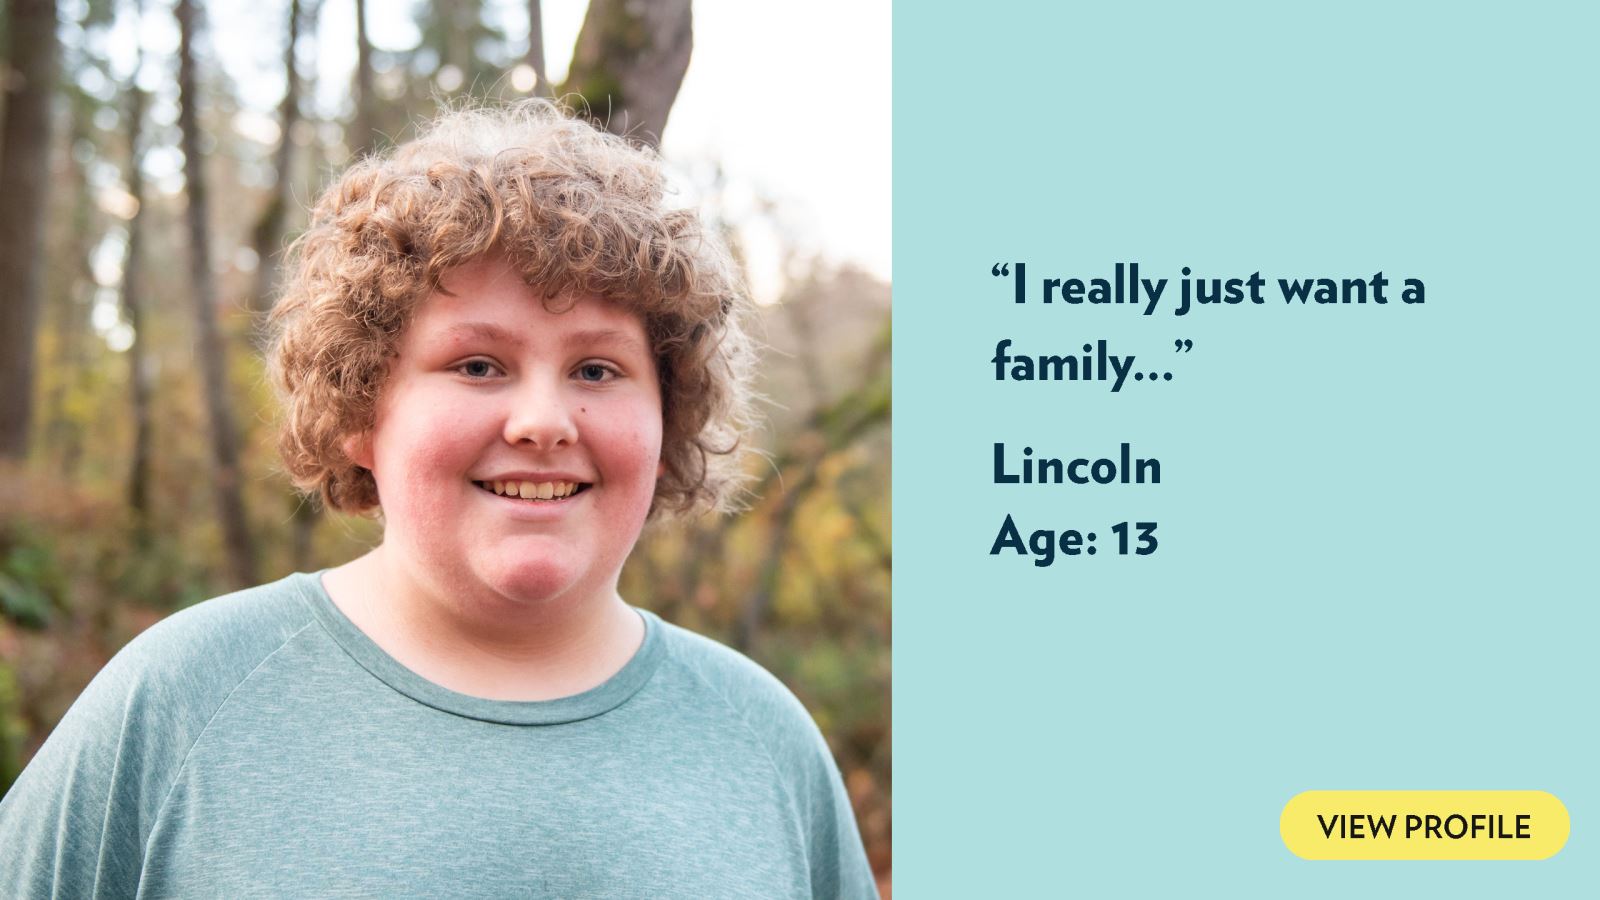 I really just want a family… Lincoln, age 13. View profile.